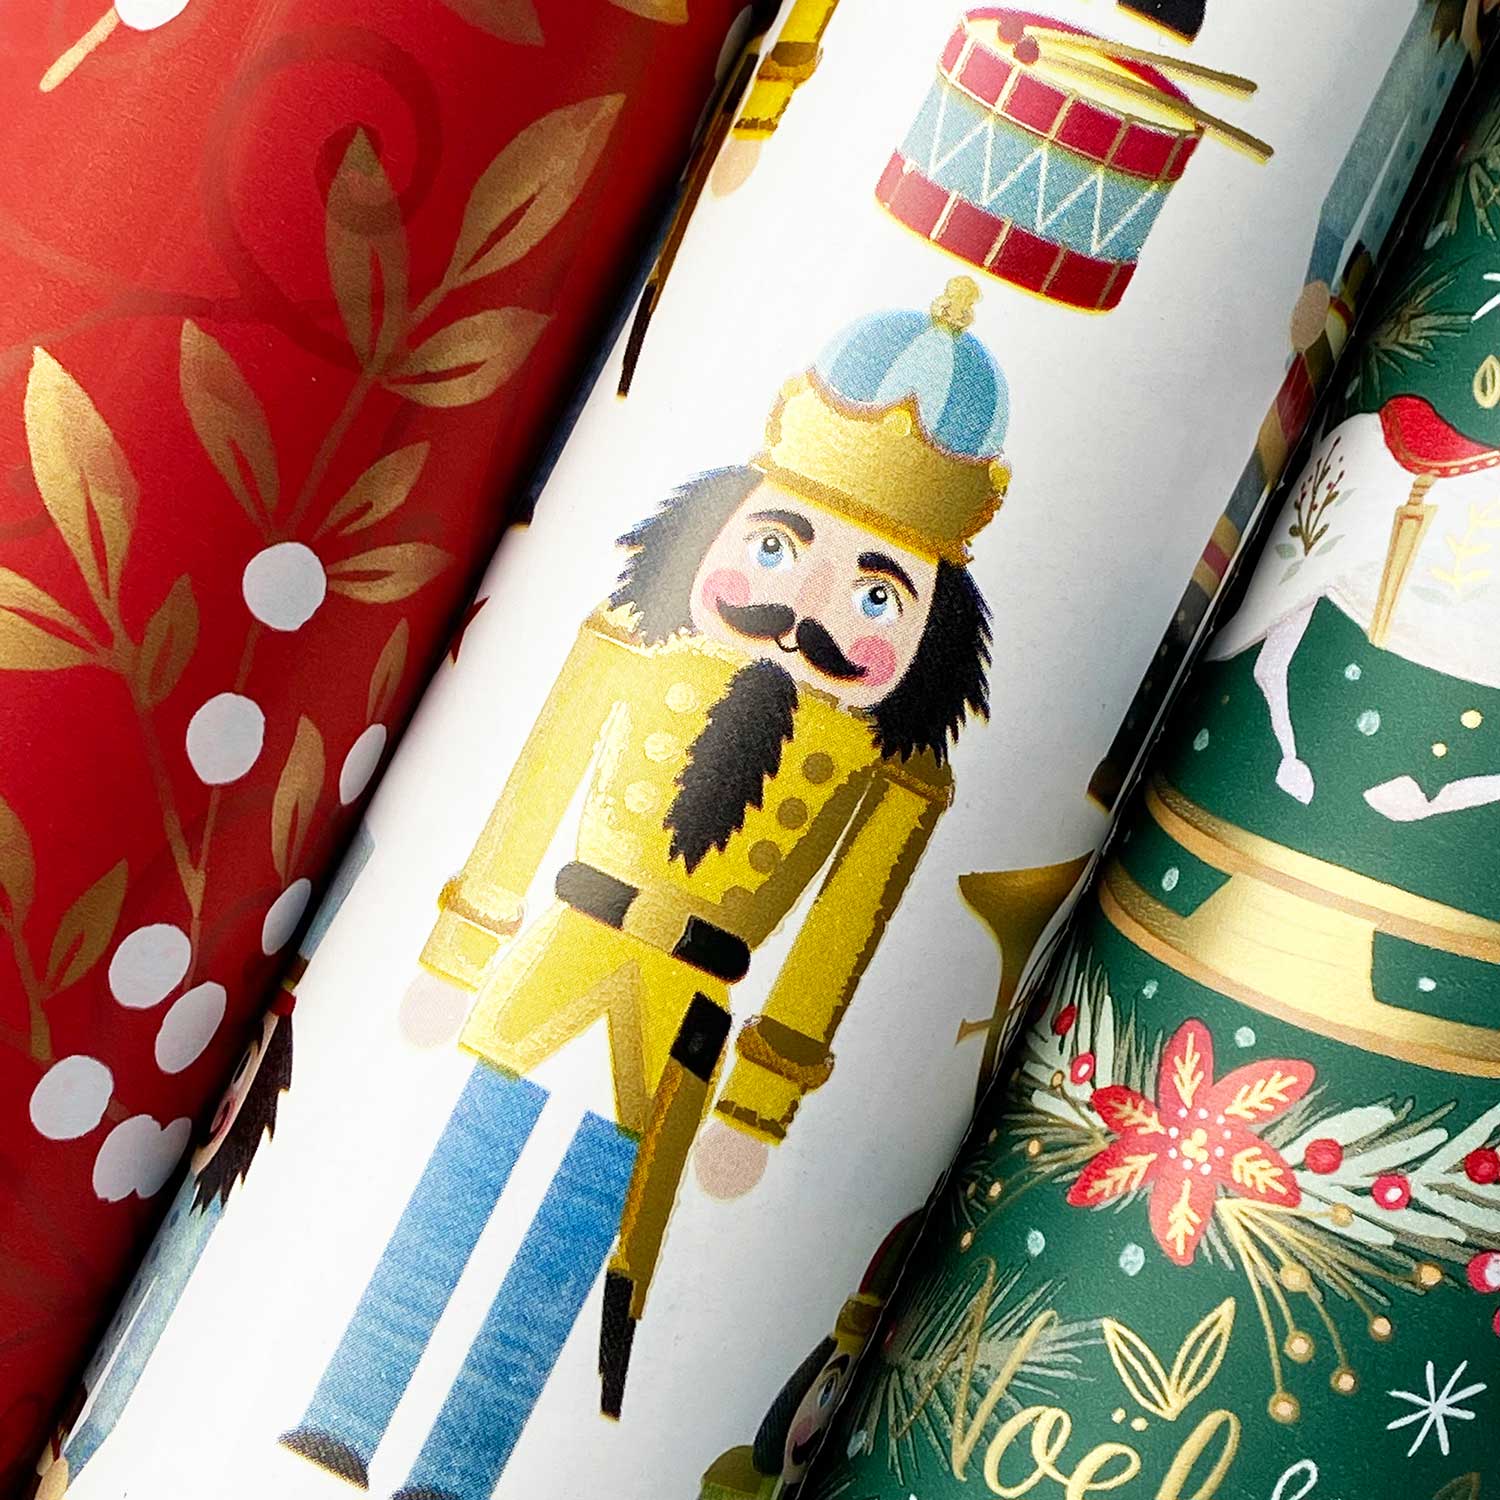 Traditional Christmas Wrapping Paper Roll Bundle